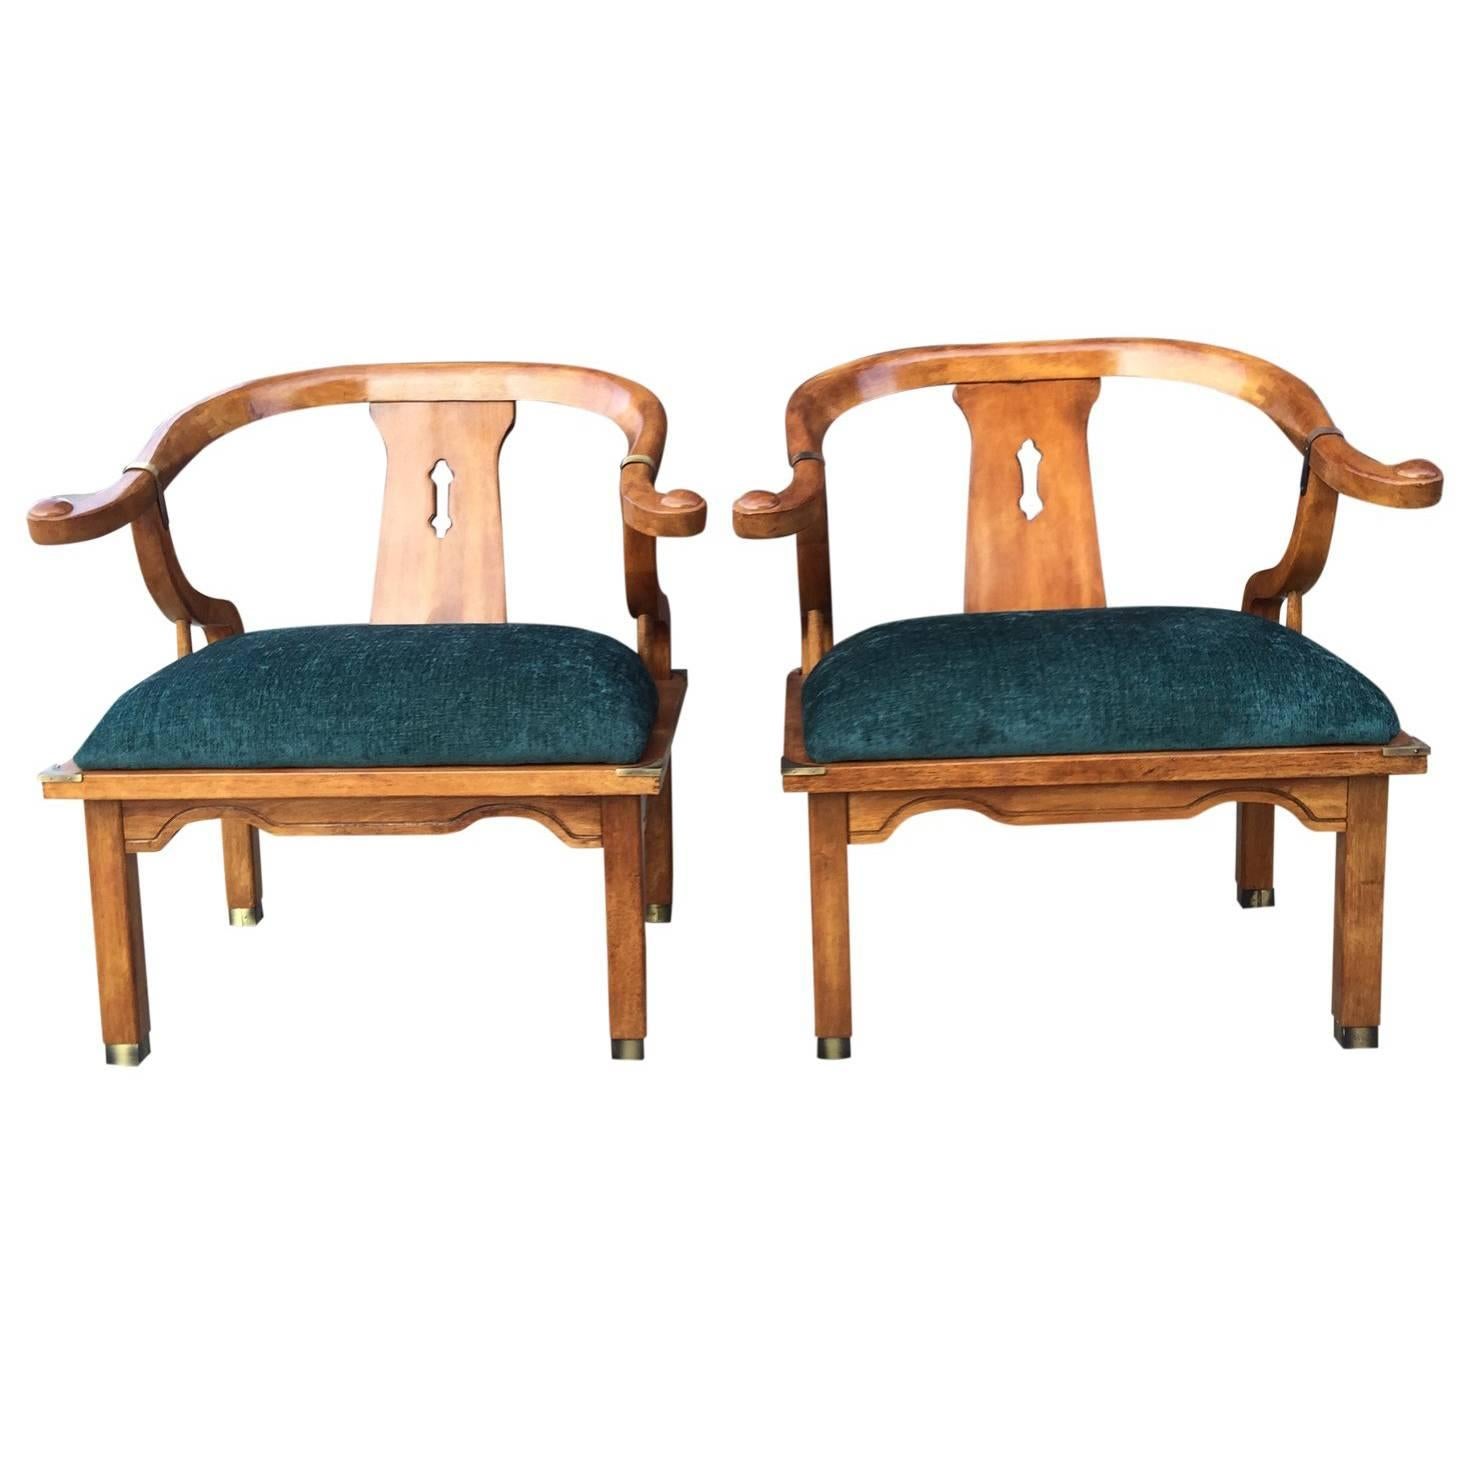 Pair of James Mont for Century Asian Inspired Horseshoe Chairs in Emerald Green